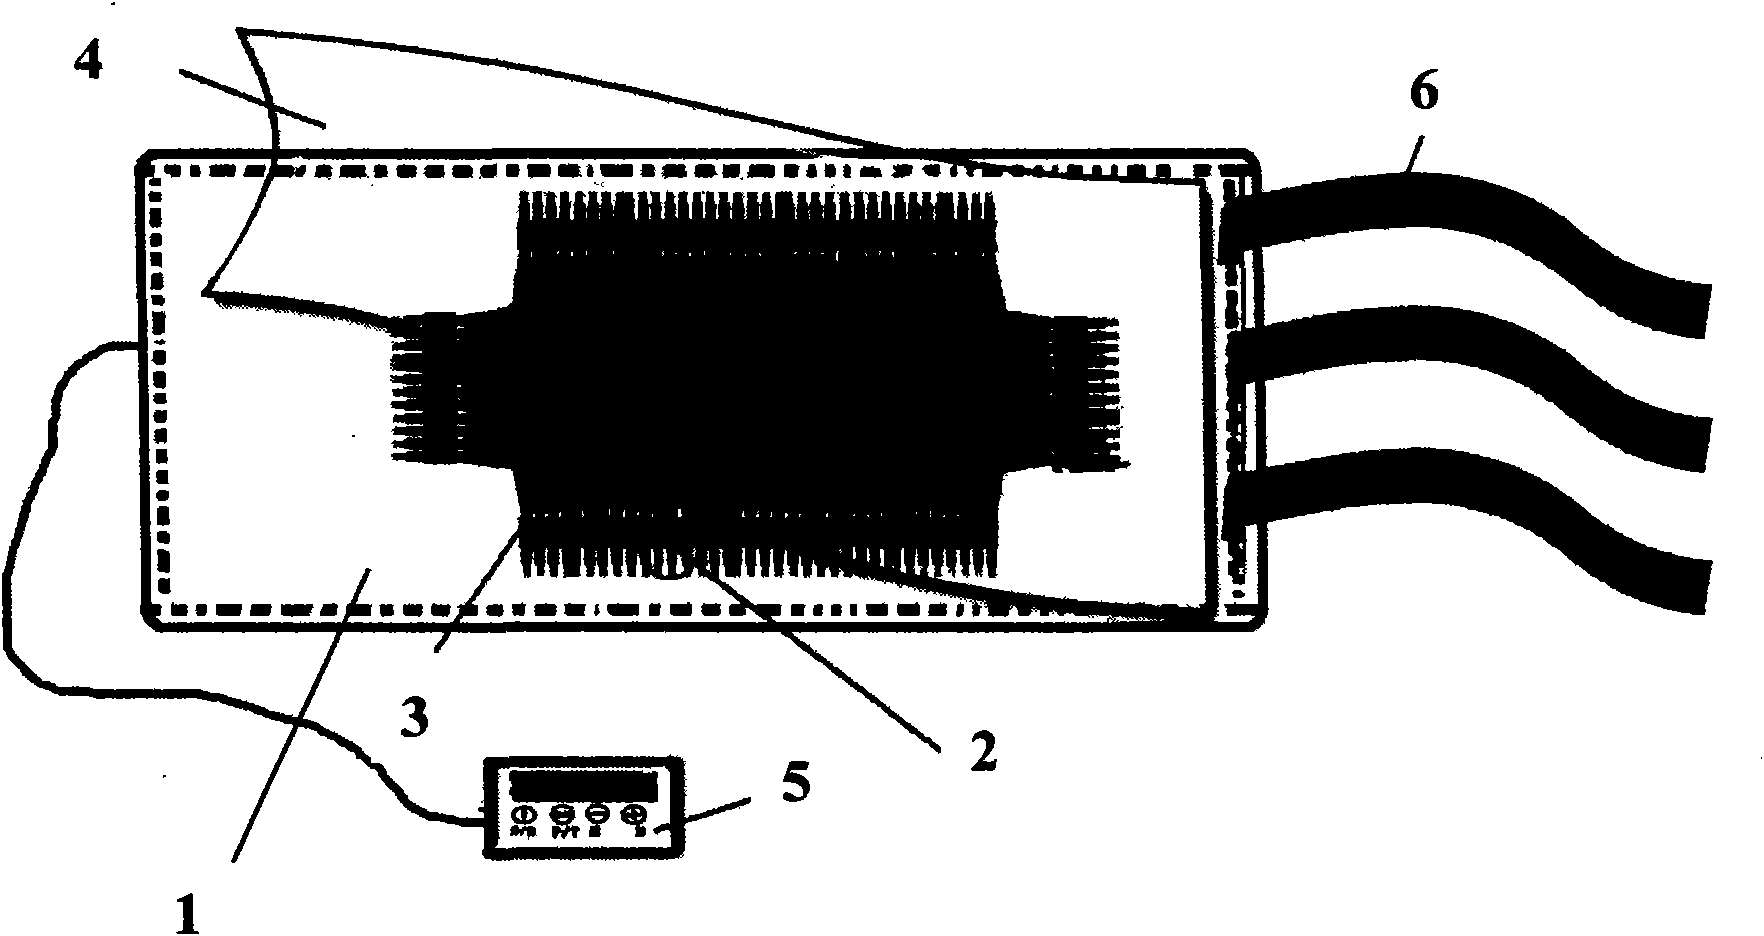 Light-medicine-combined treatment device for skin ulcers